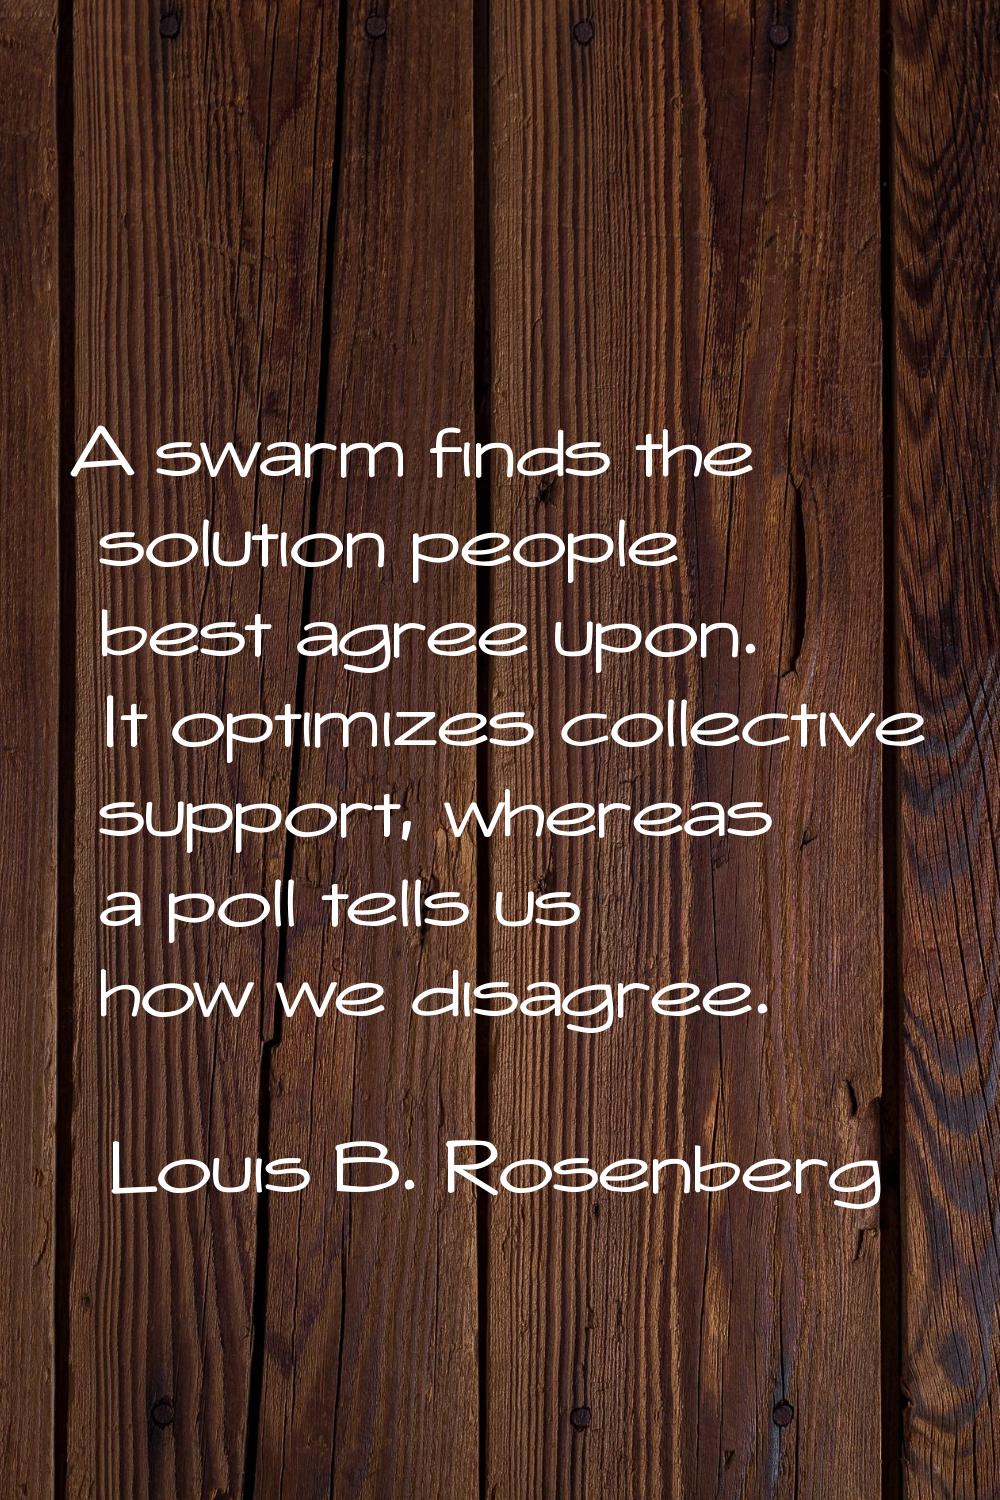 A swarm finds the solution people best agree upon. It optimizes collective support, whereas a poll 